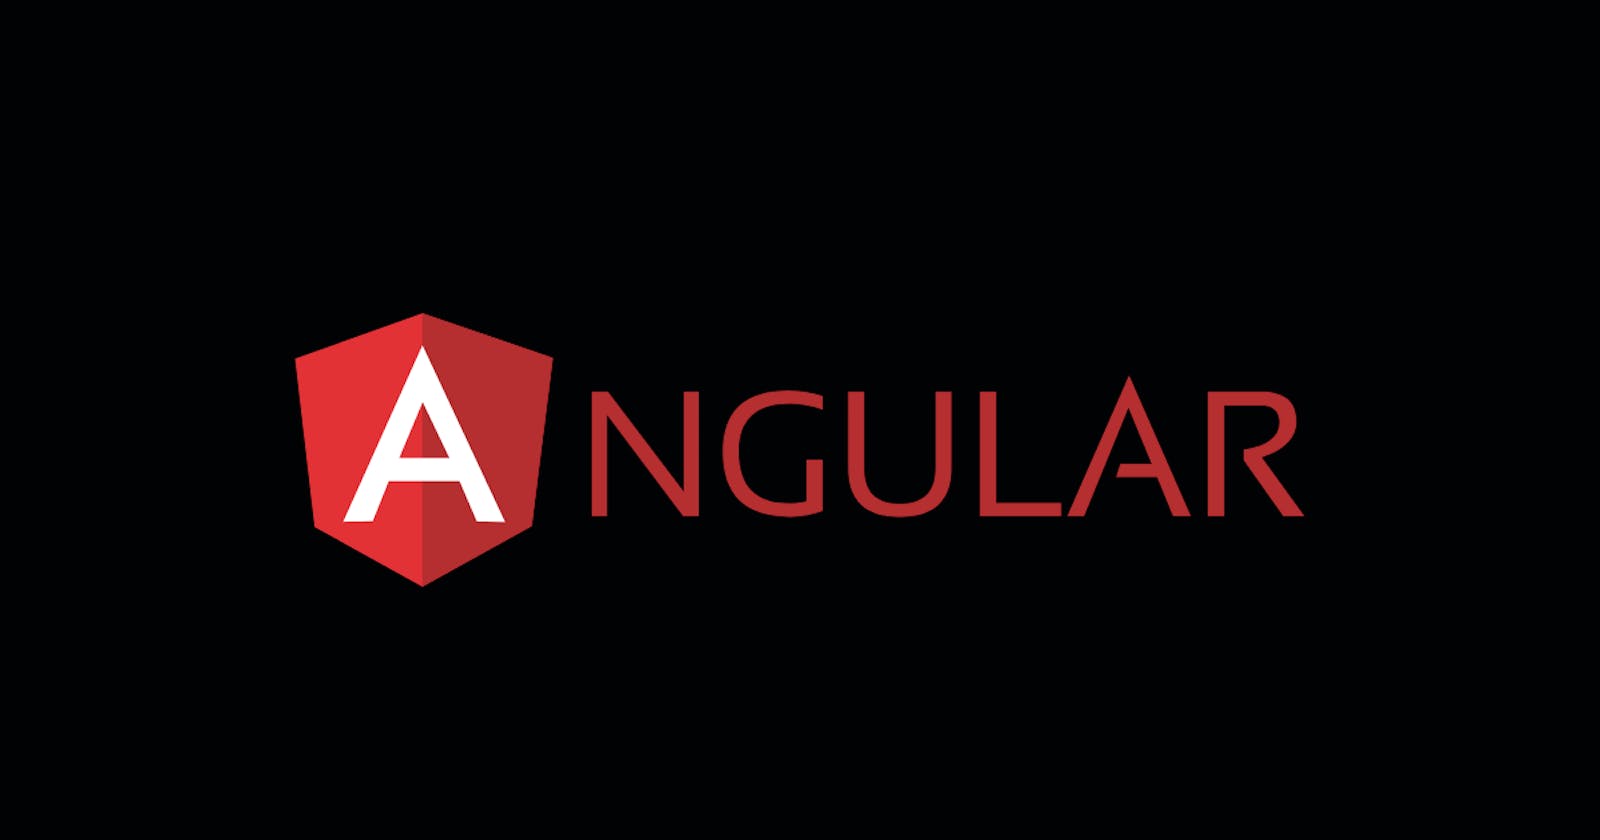 What is the difference between AngularJS and Angular 2?